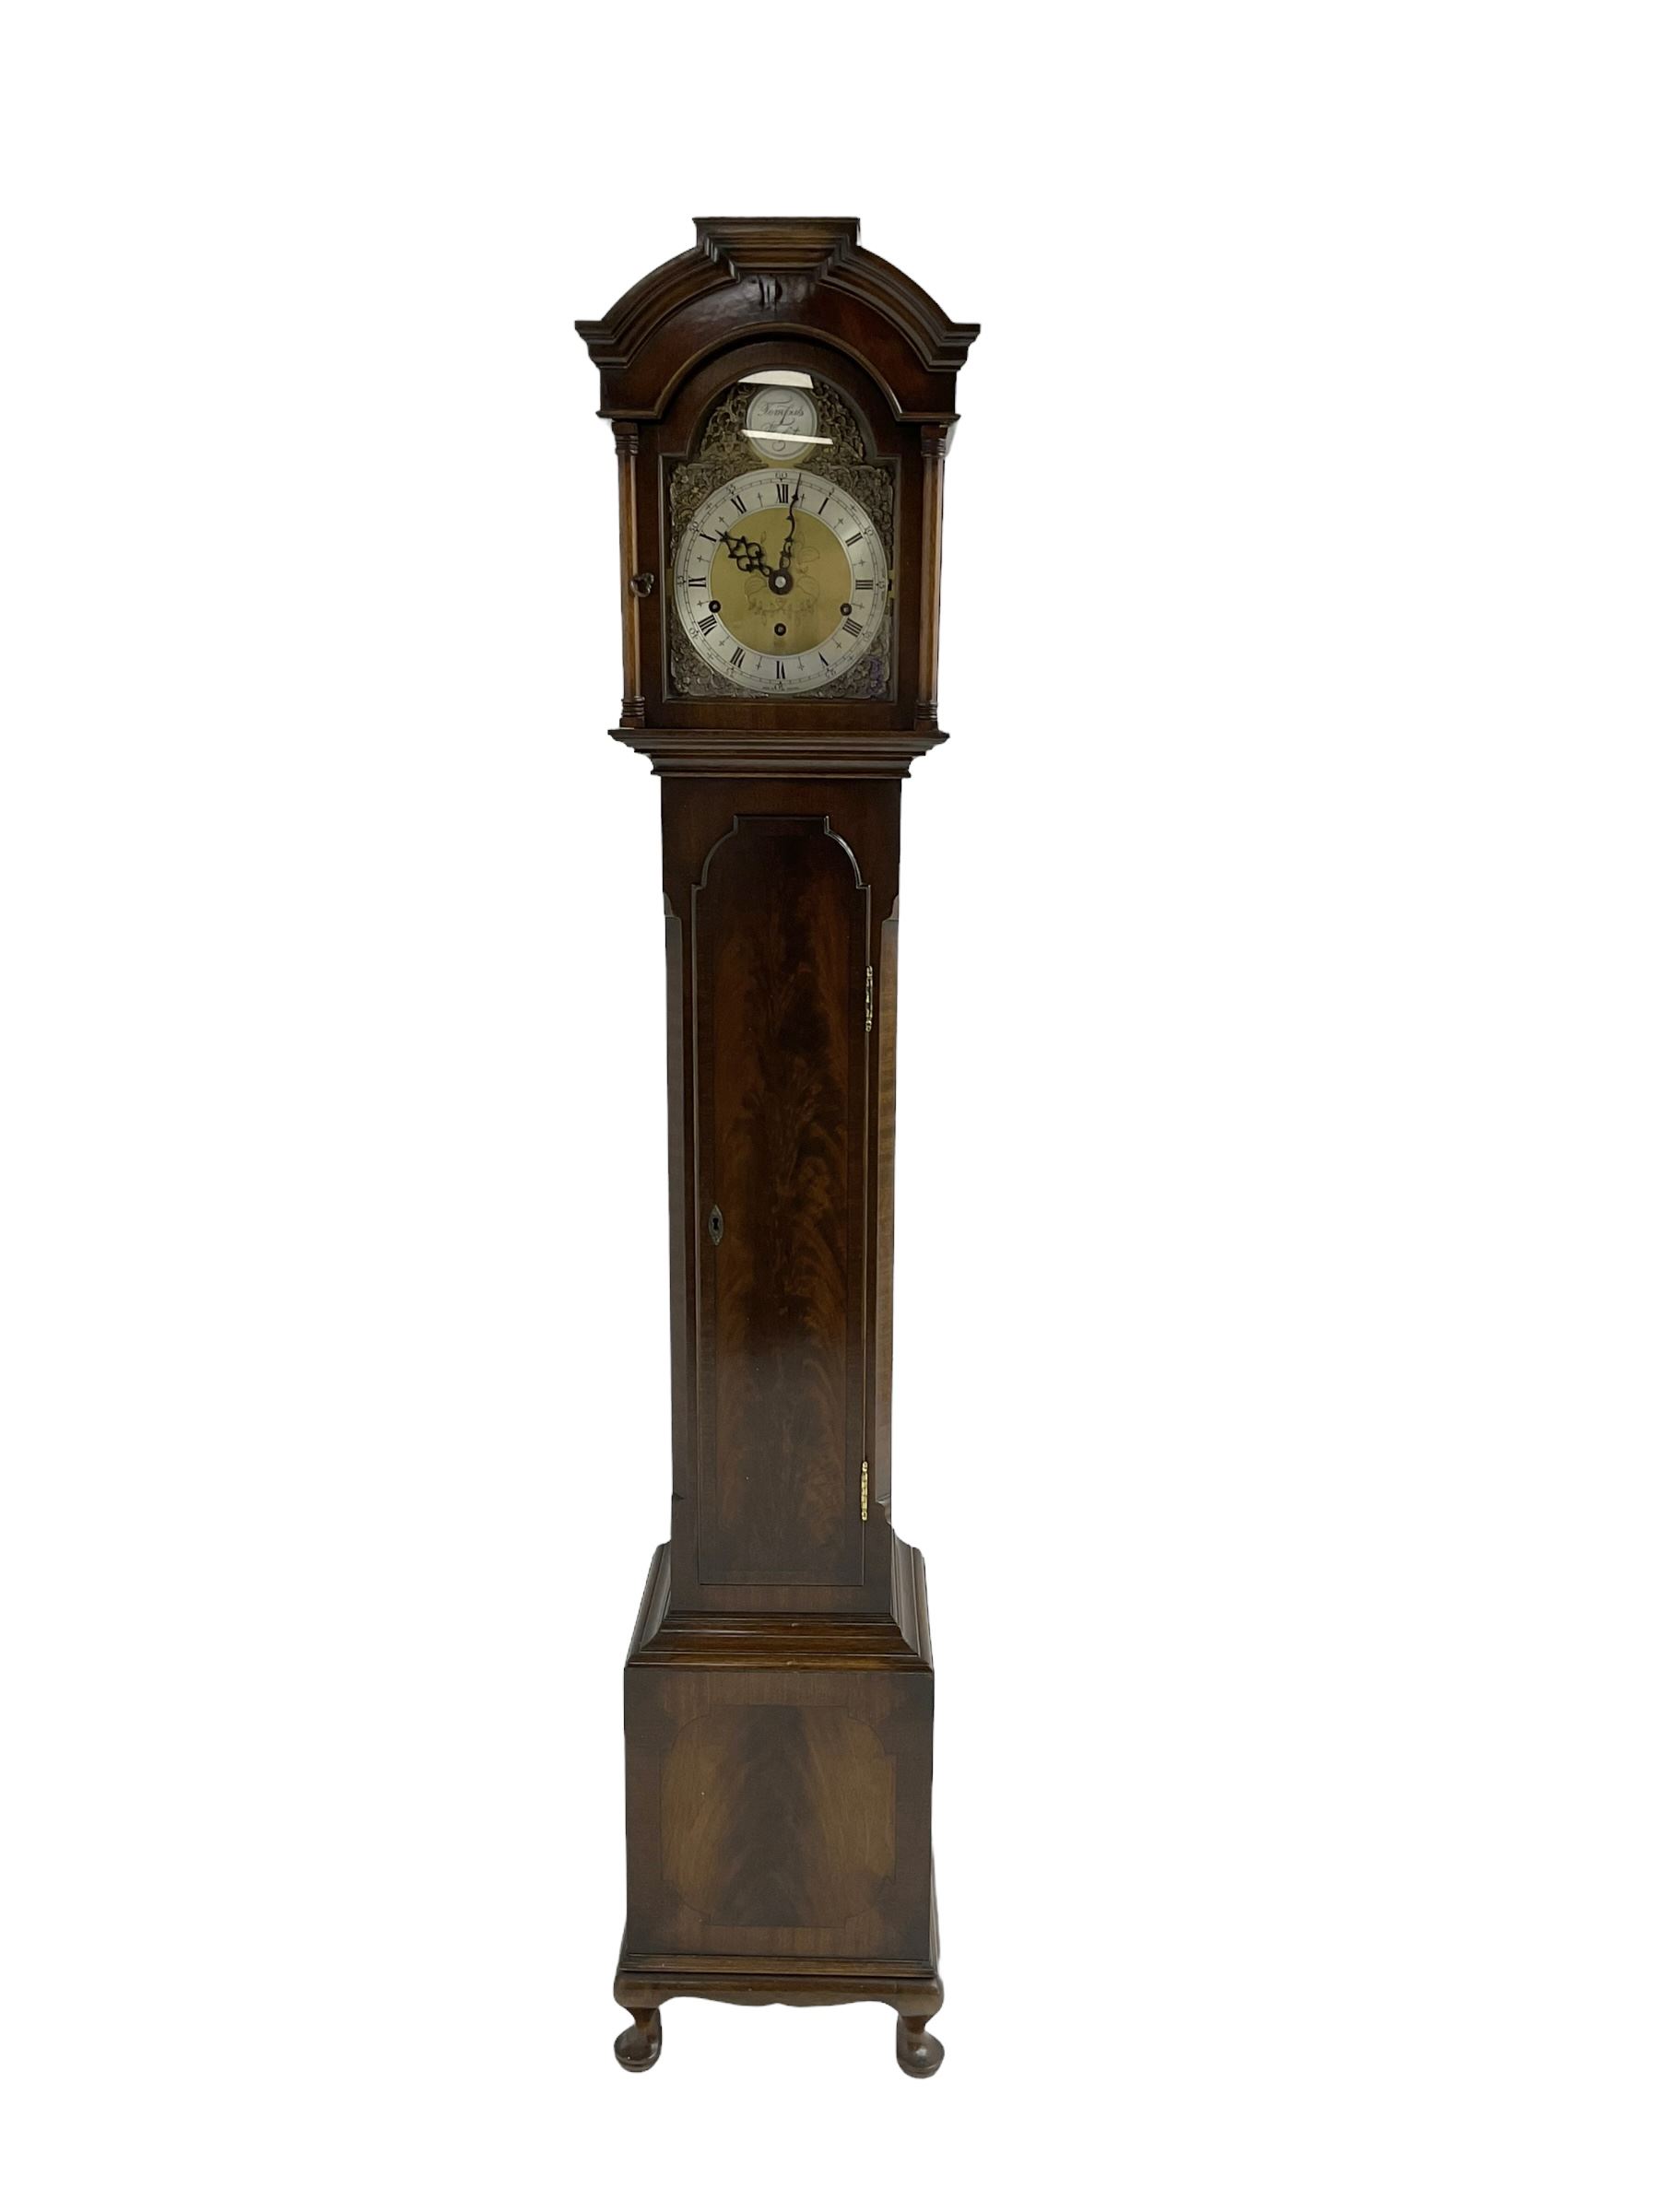 20th century Westminster chiming Grandmother clock - Mahogany case with a three train Elliot movemen